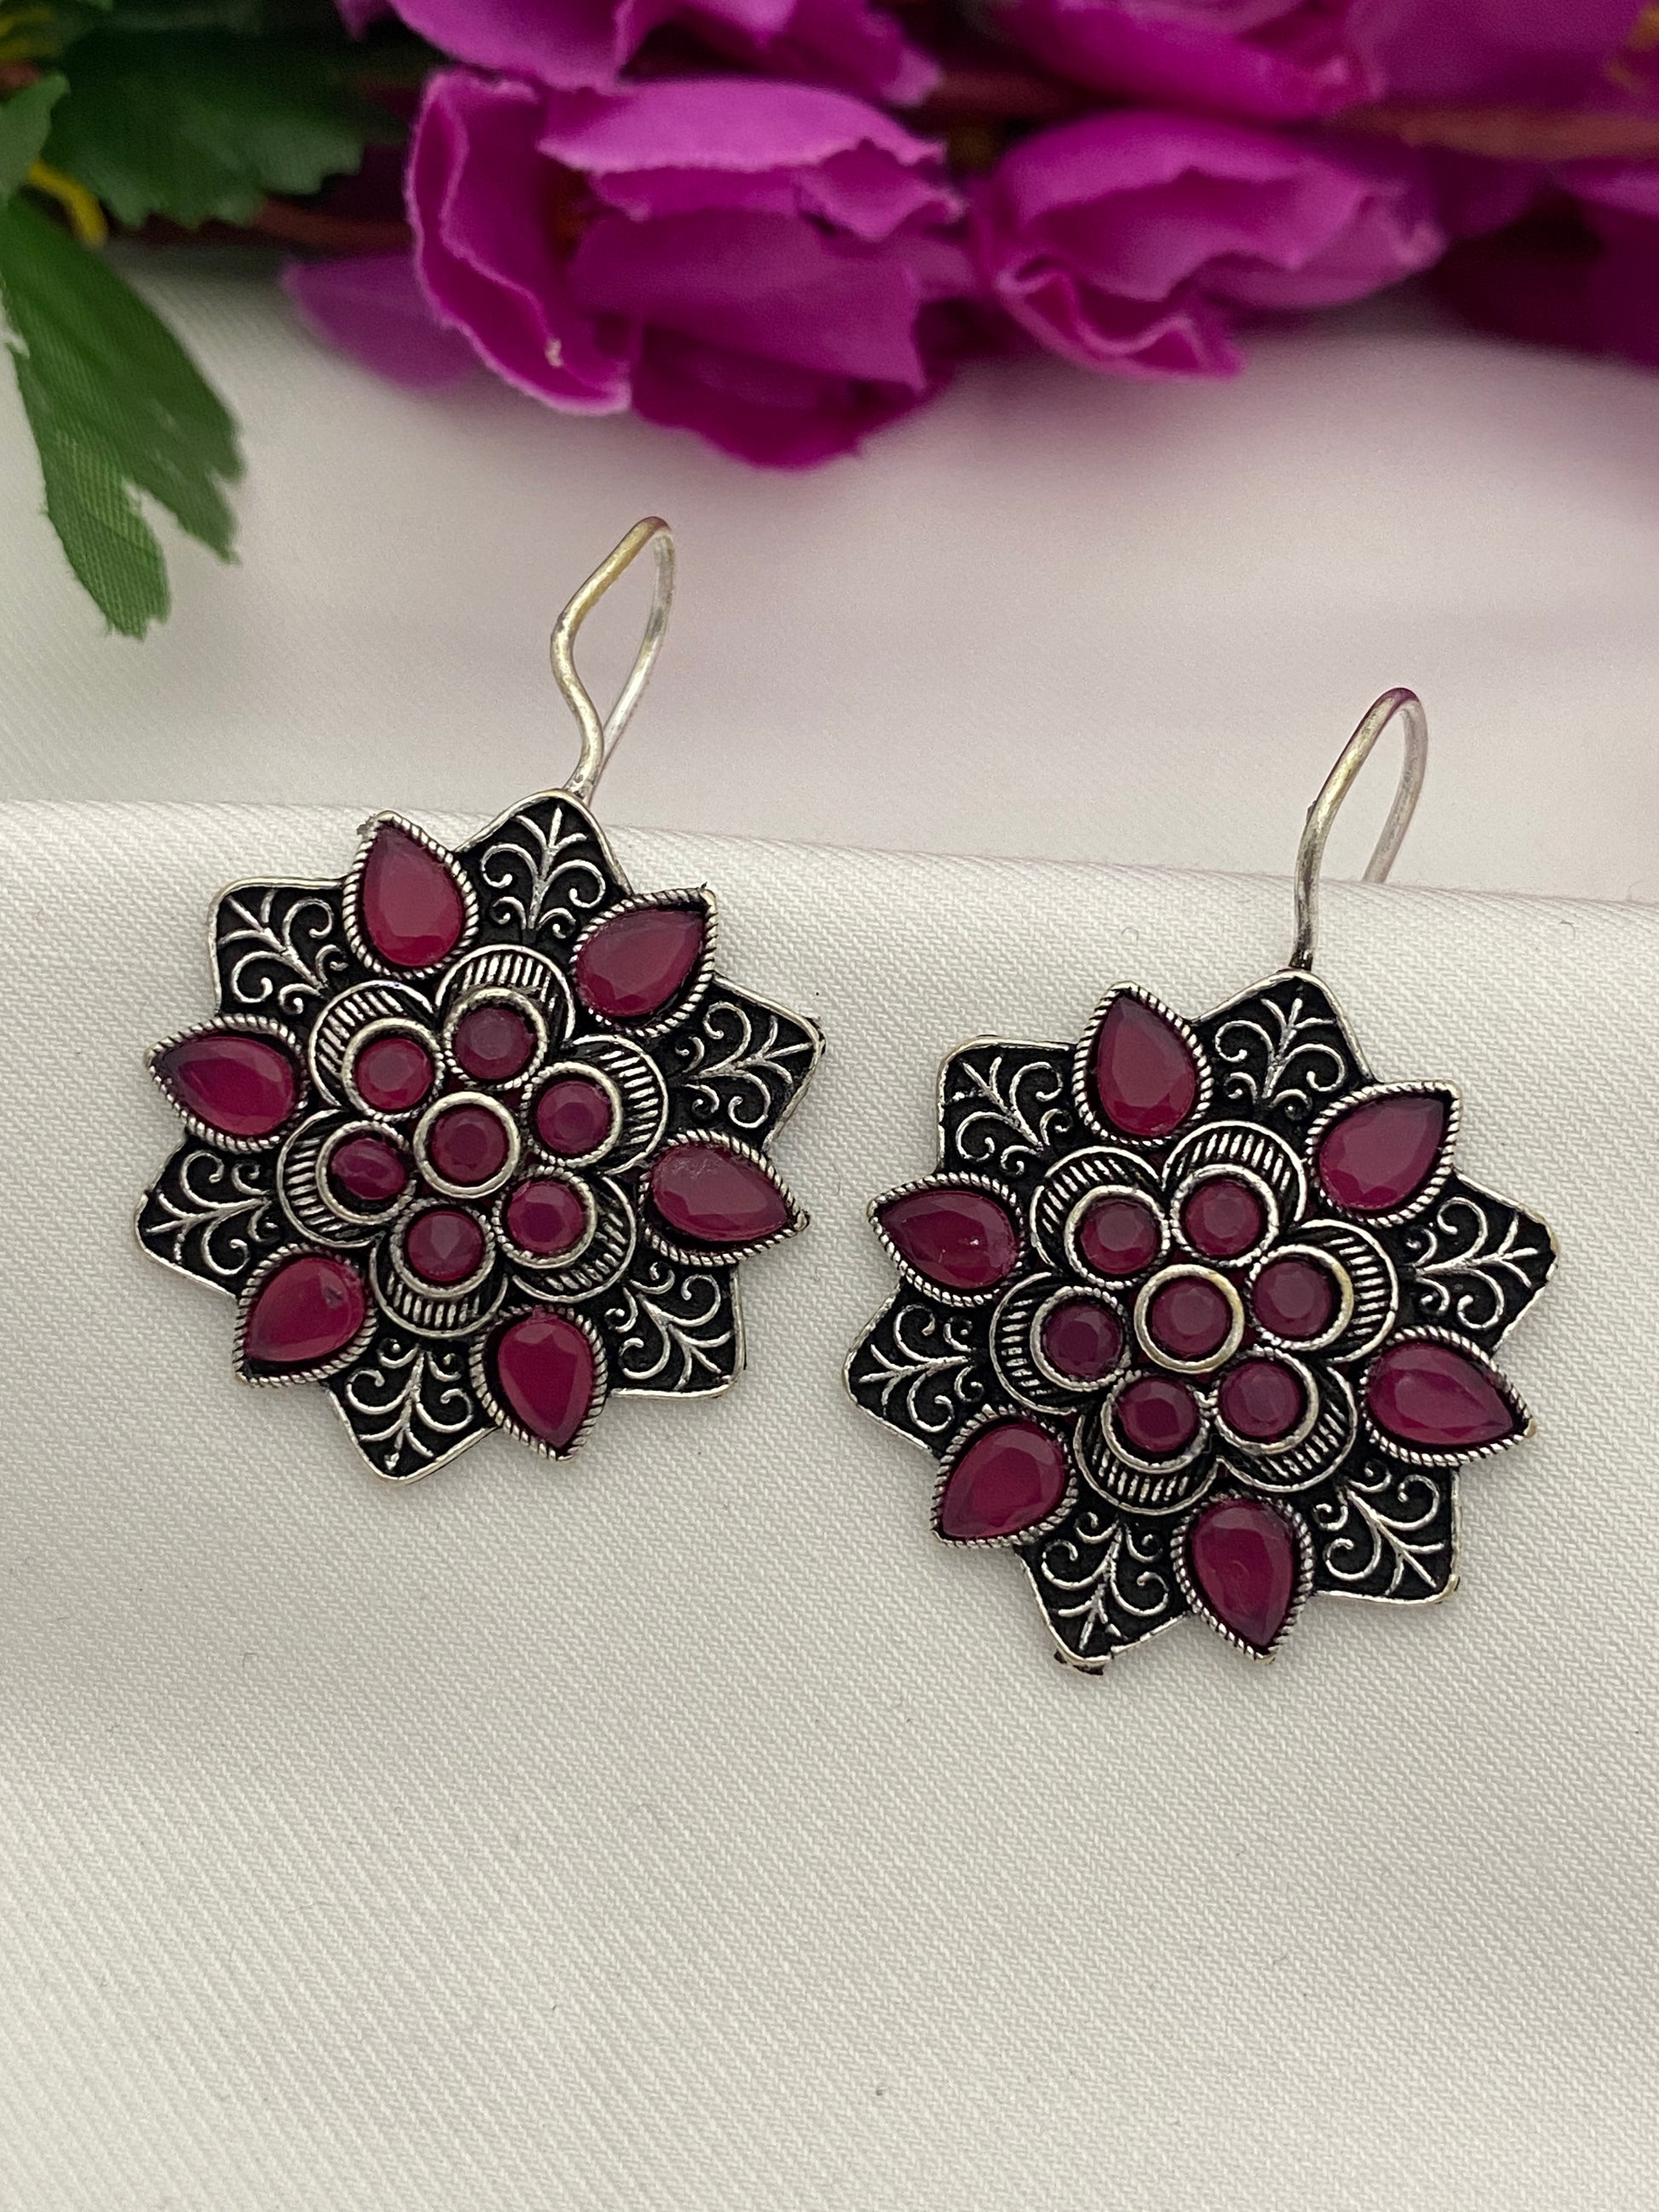 Appealing Pink Color Rounded Floral Designer Oxidized Earrings For Women In USA